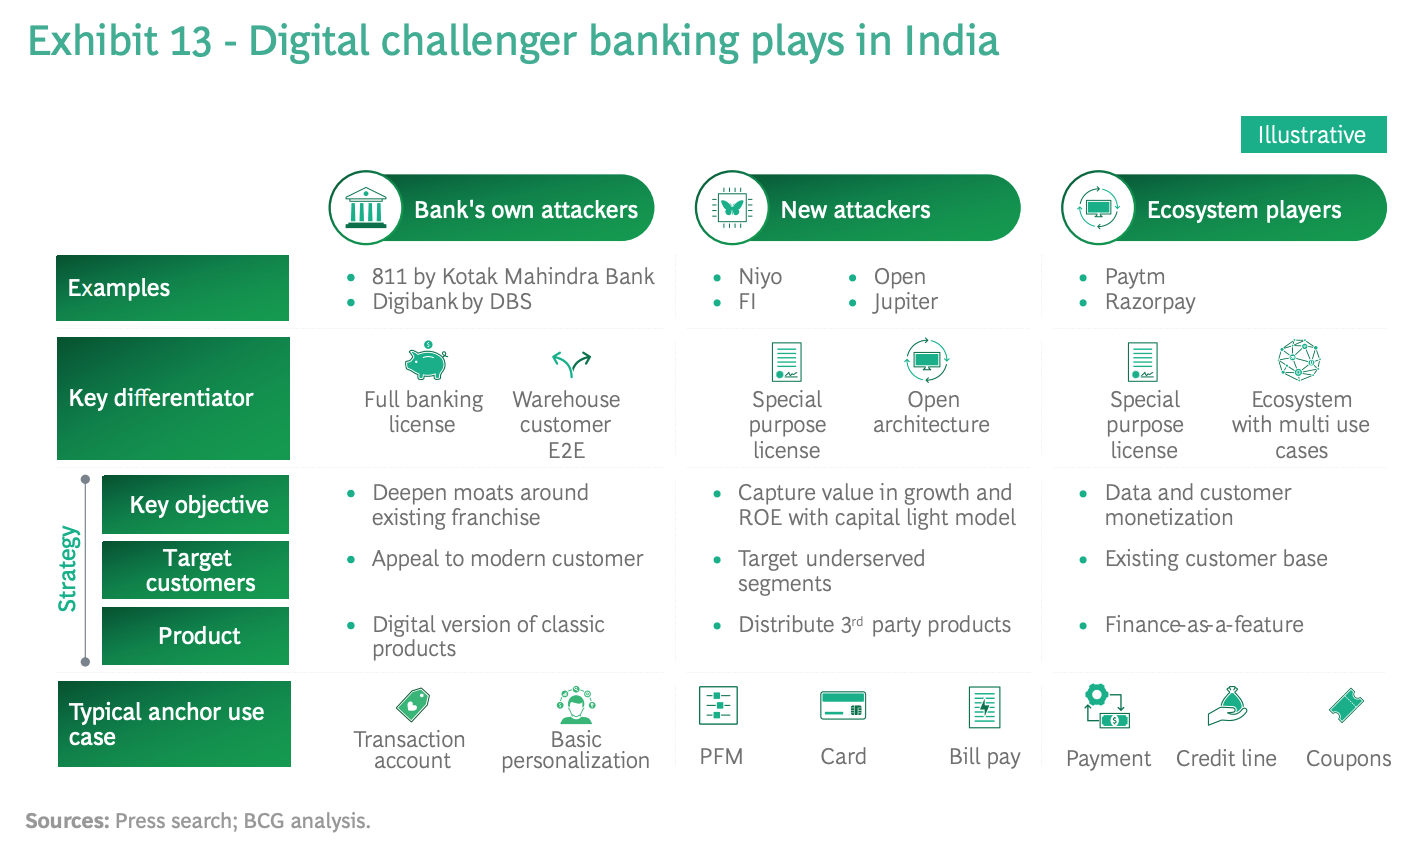 Digital challenger banking plays in India, Source: Boston Consulting Group, June 2021